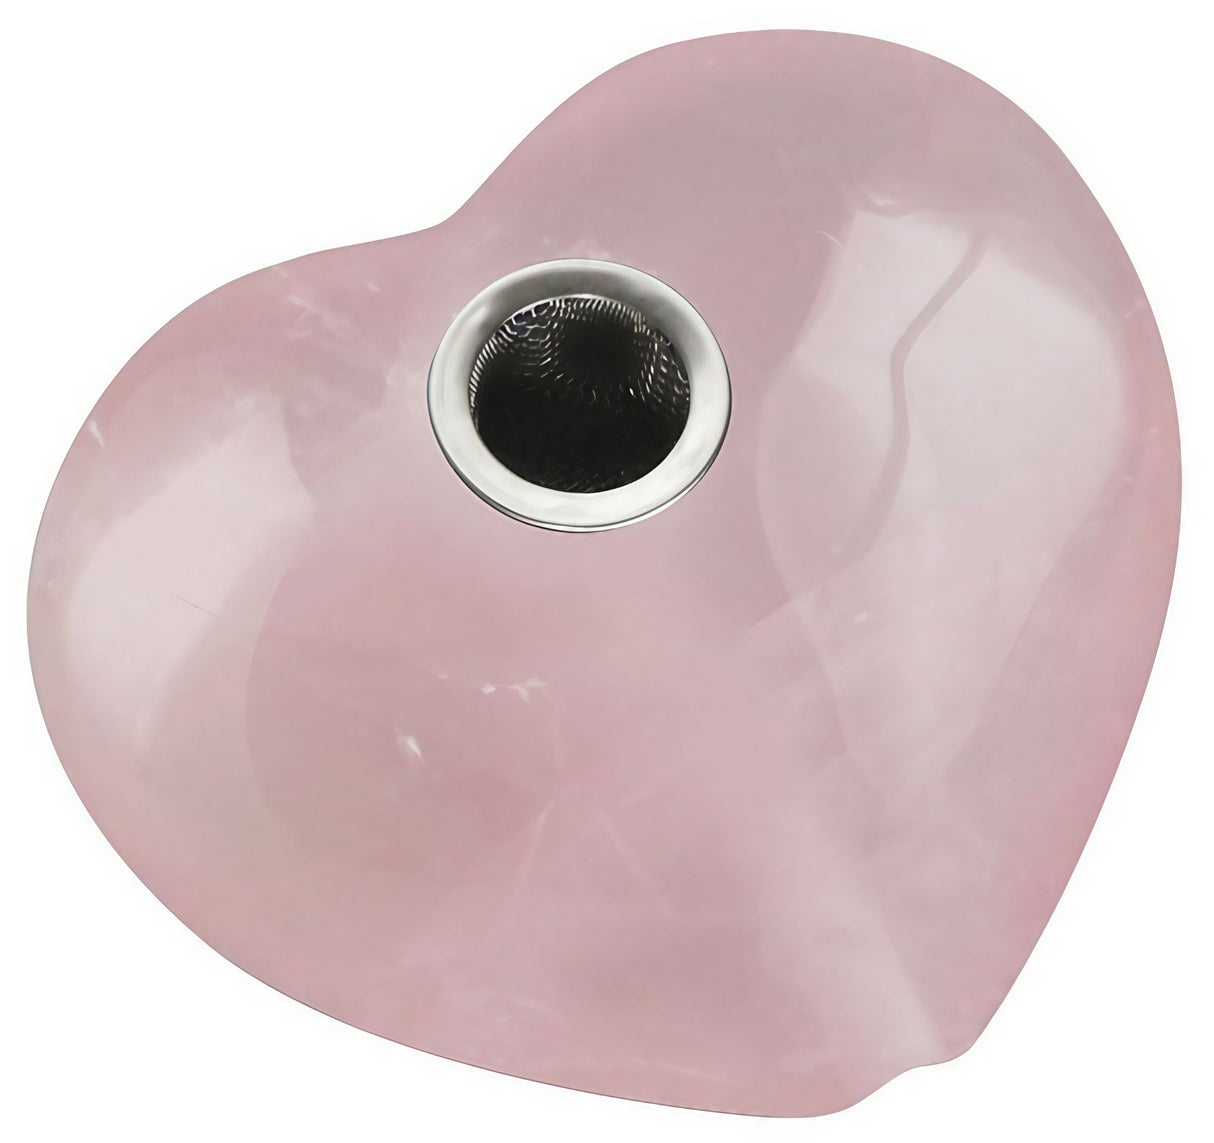 Rose Quartz Heart-Shaped Hand Pipe with Steel Bowl, Top View, 2.5" Length